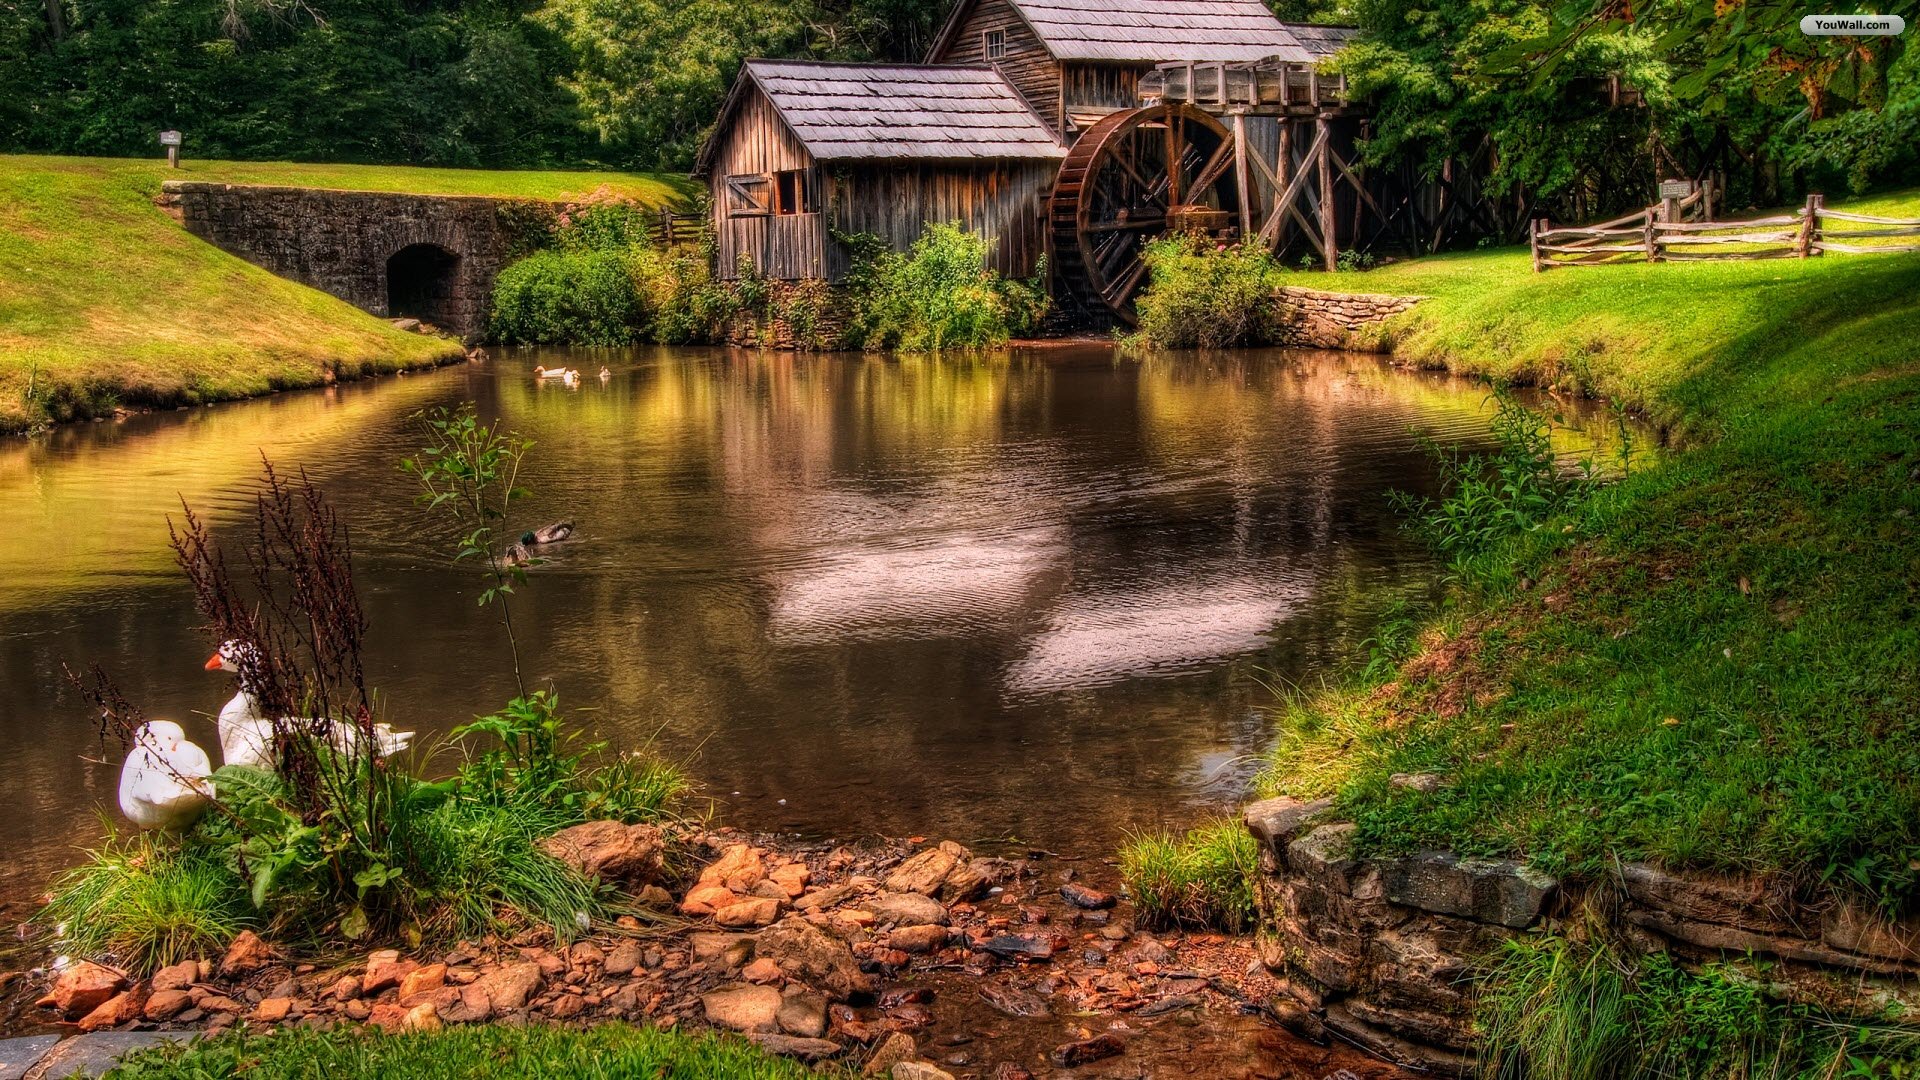 love how you see this old style cabin with a waterwheel next to this